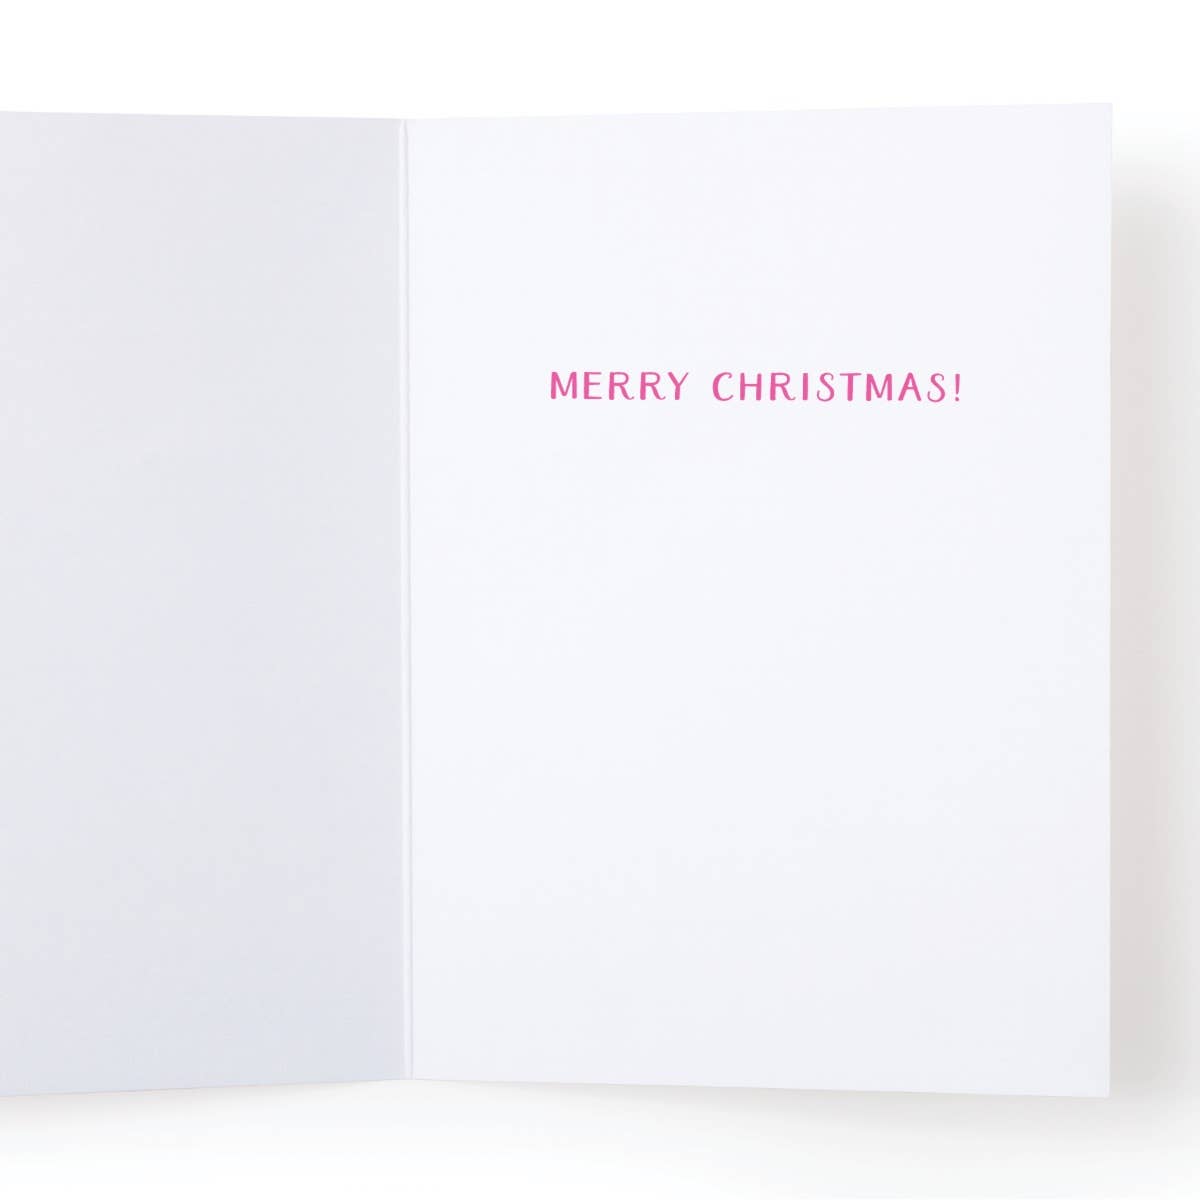 Dreaming of a White Christmas Greeting Card